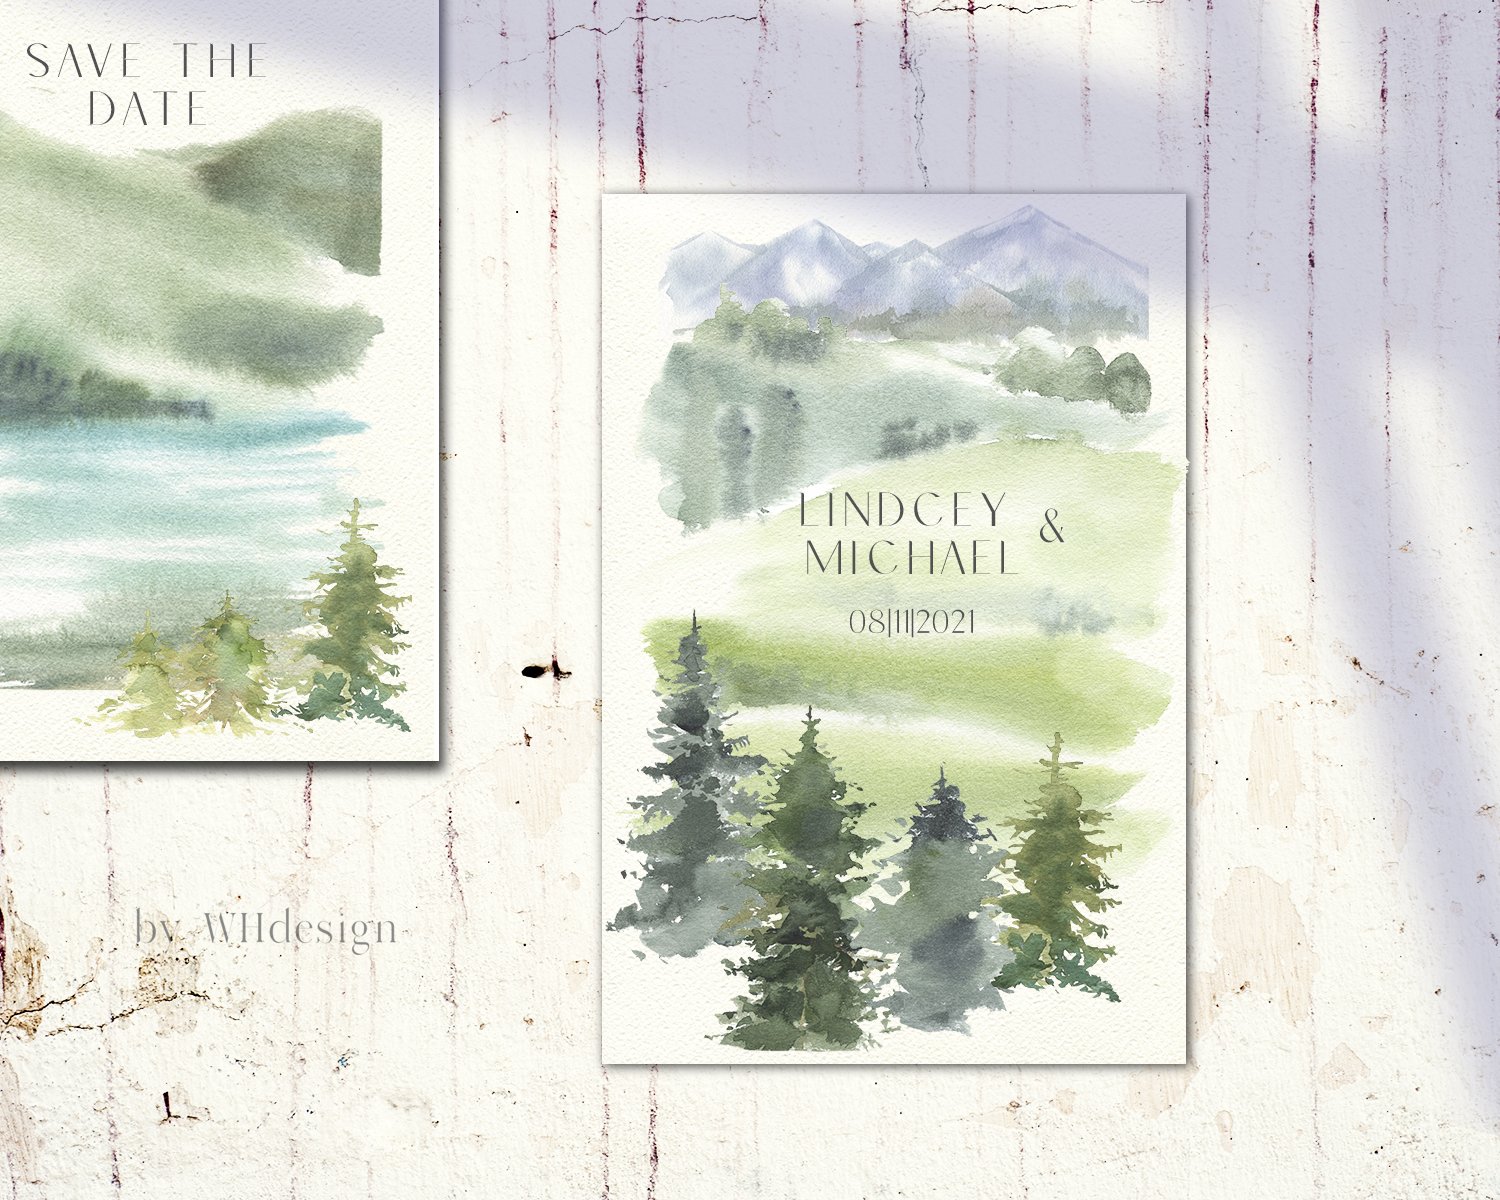 Two watercolor paintings of mountains and trees.